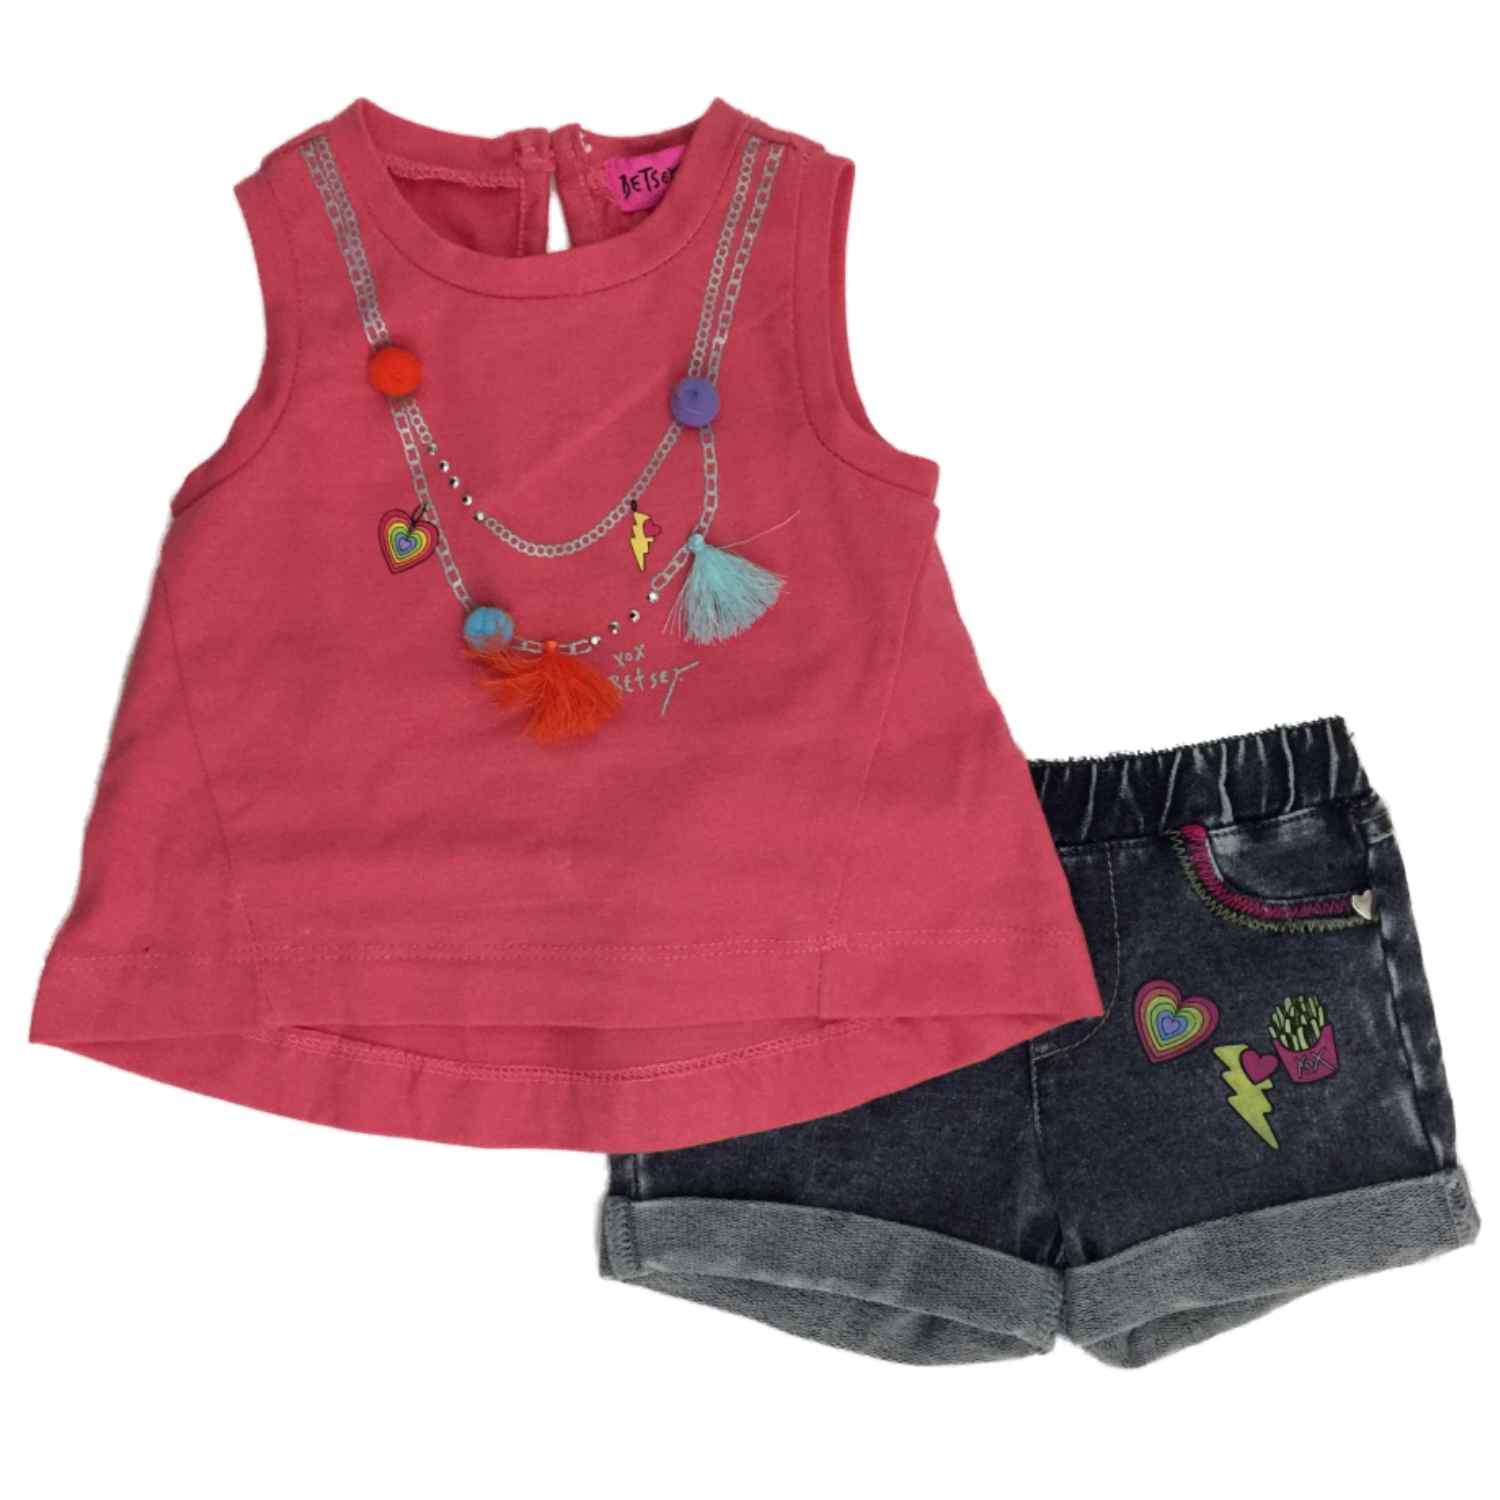 Betsy Johnson Infant Pink Rhinestone Tank Top Girls 2 Piece Jean Short Outfit